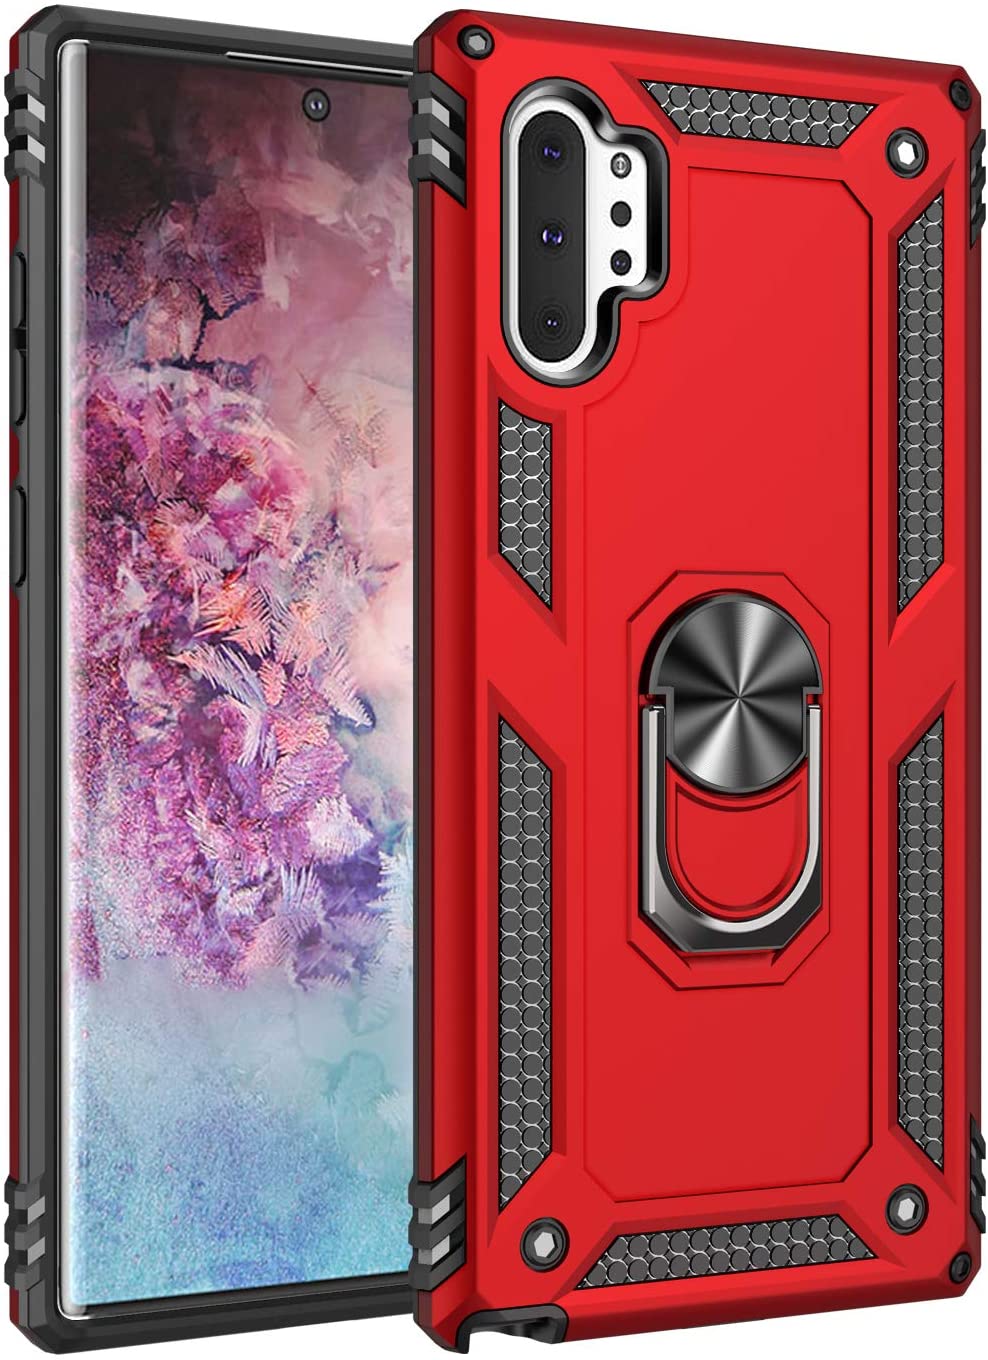 FANSONG Galaxy Note 10 Case, Phone Cover Corner with Neck Strap